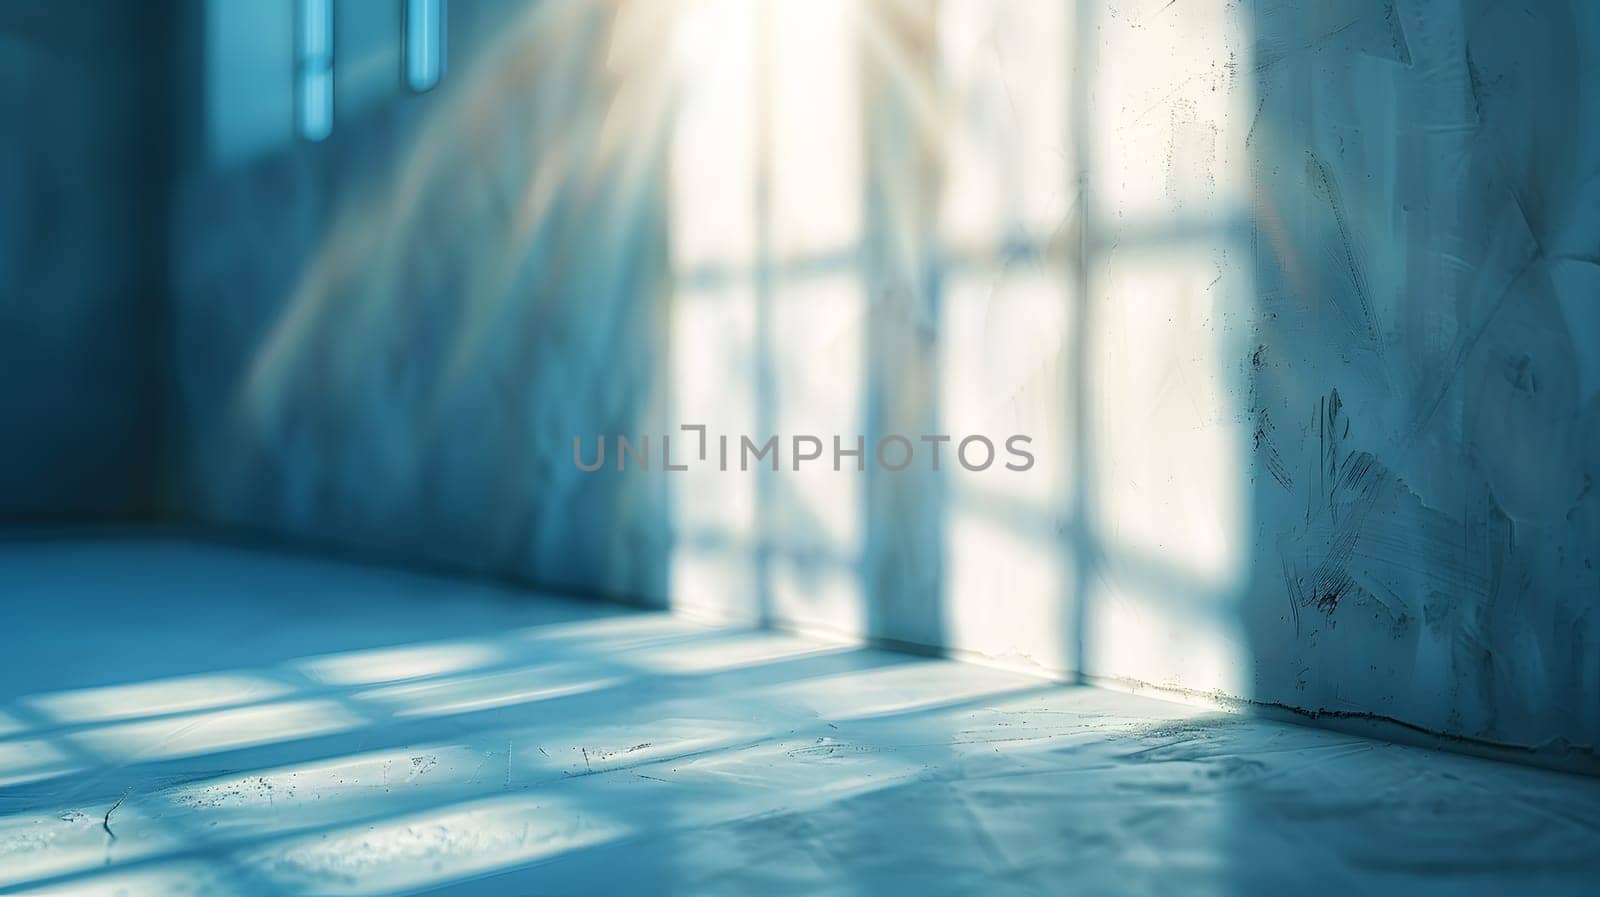 The electric blue sunlight filters through the windows of the empty room, casting tints and shades on the wooden floor. A plant adds life to the serene atmosphere